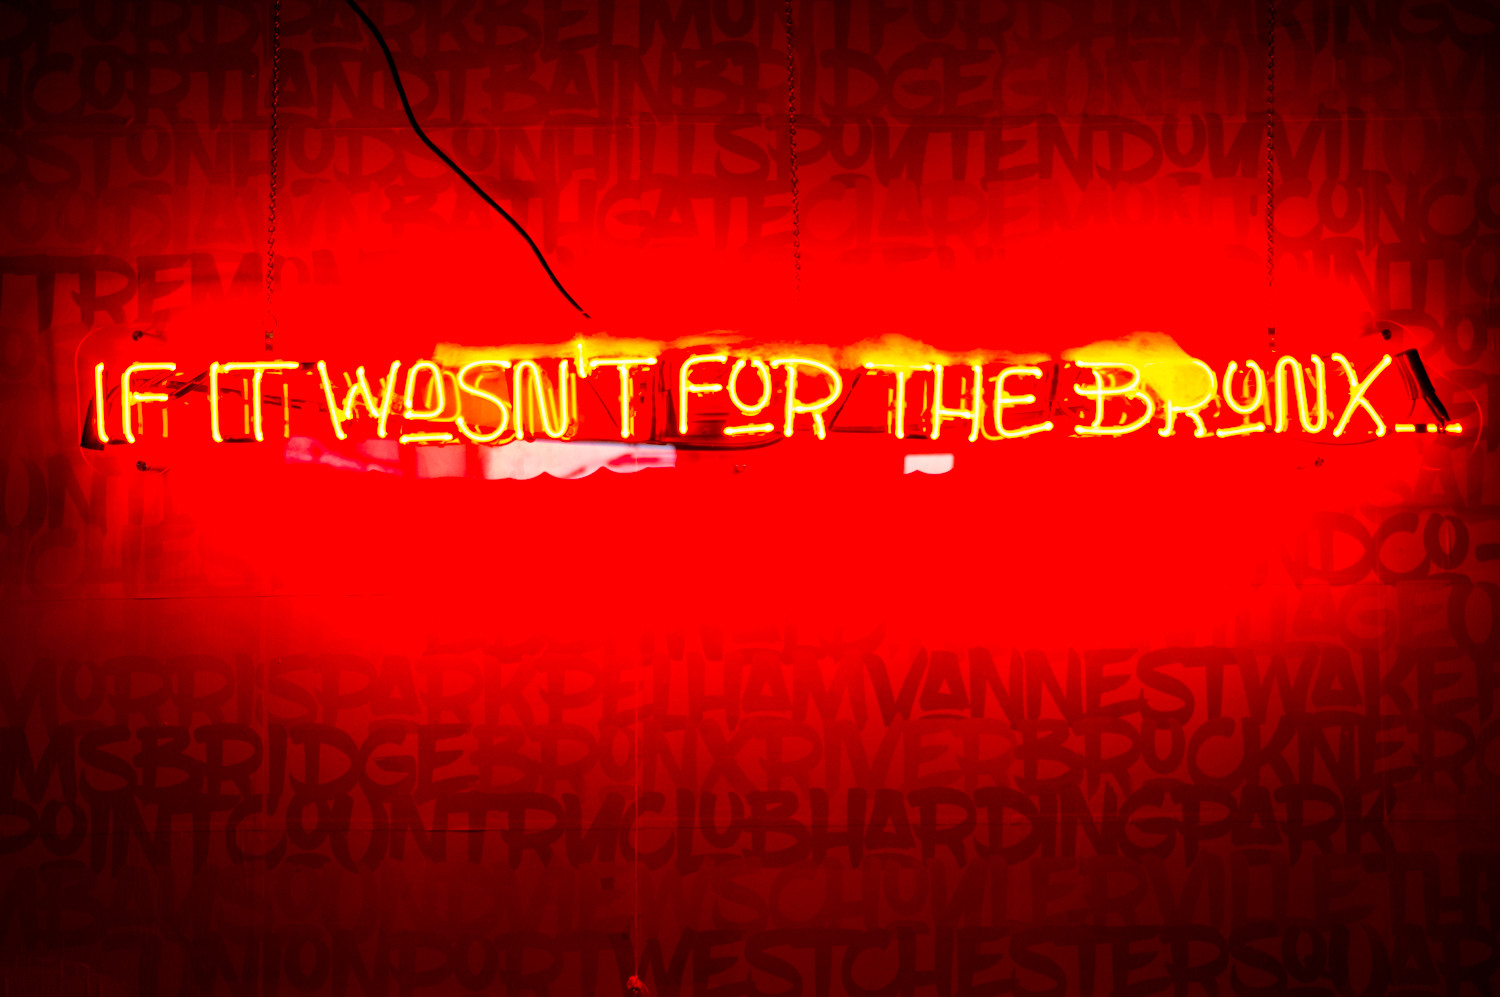 The Bronx Public has a variety of art on the wall, including a neon sign that reads ‘If it wasn't for the Bronx,’ which celebrates Bronx culture.